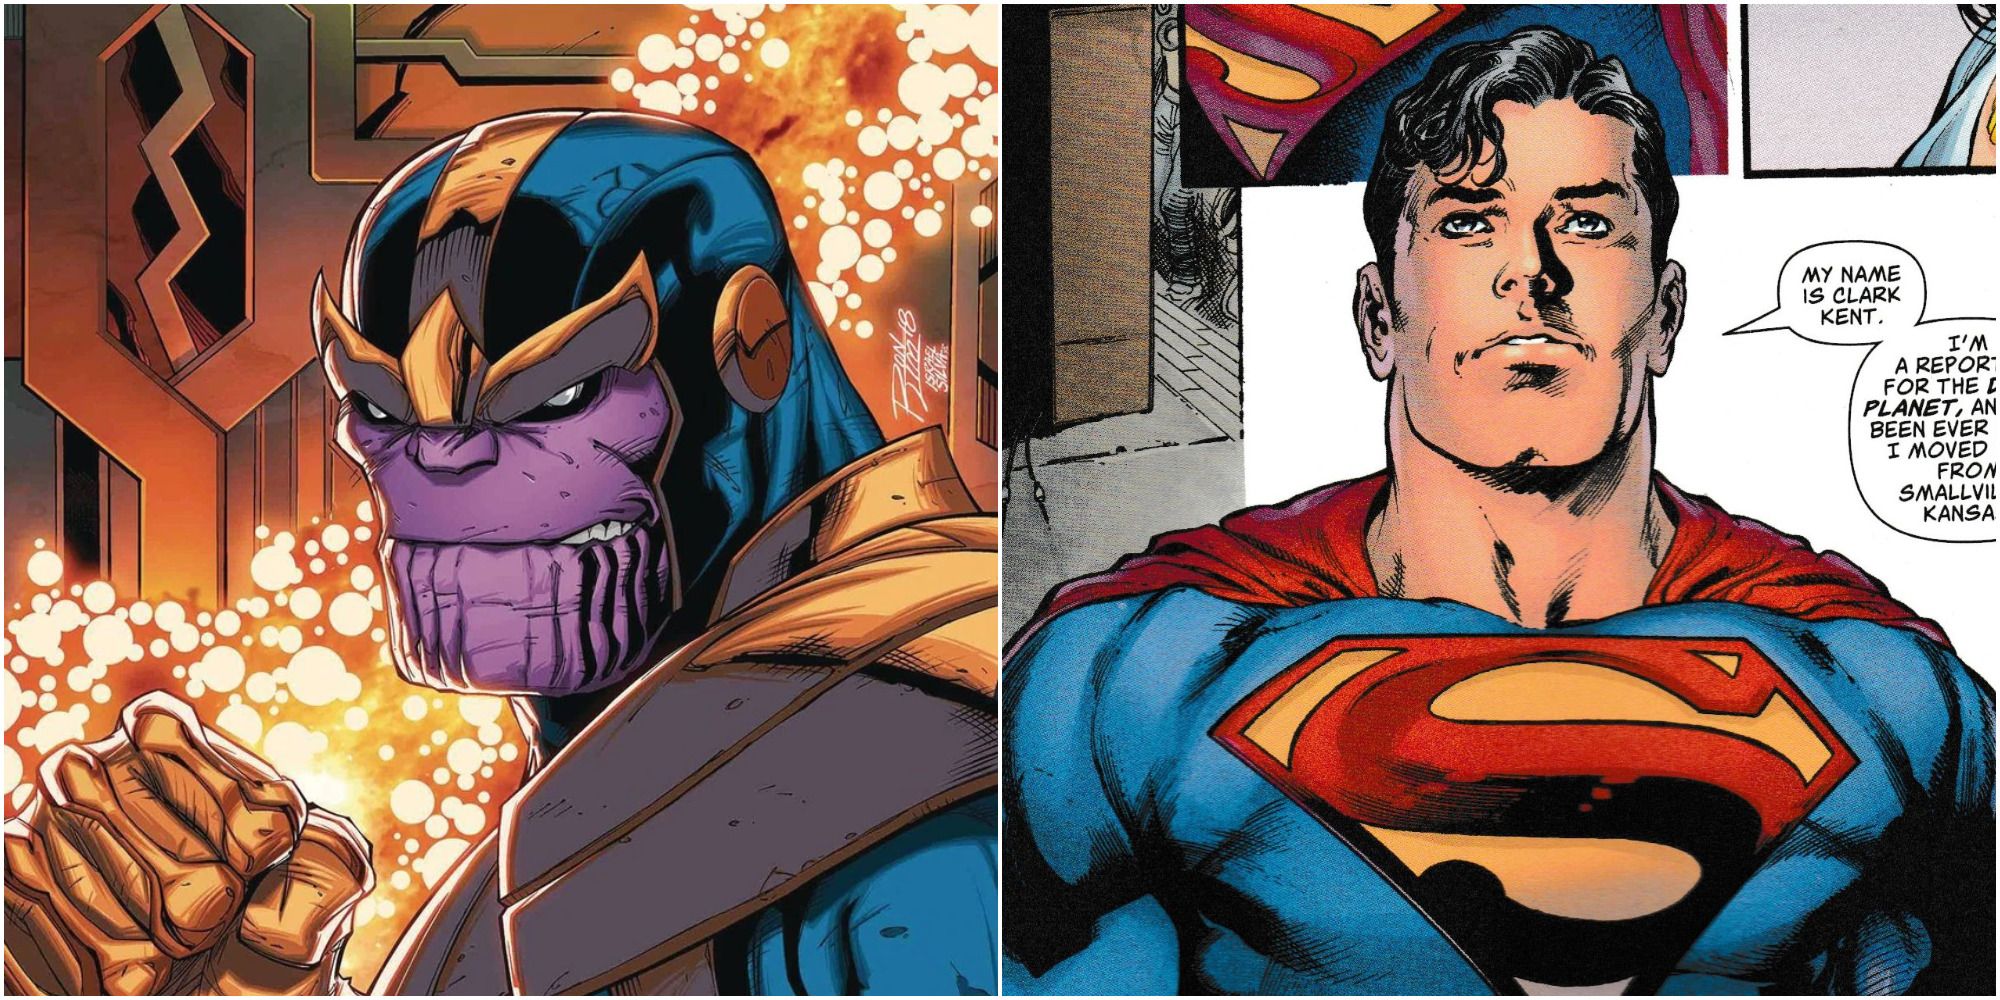 Superman vs Thor: Who Would Win in a Fight and Who Is Stronger?